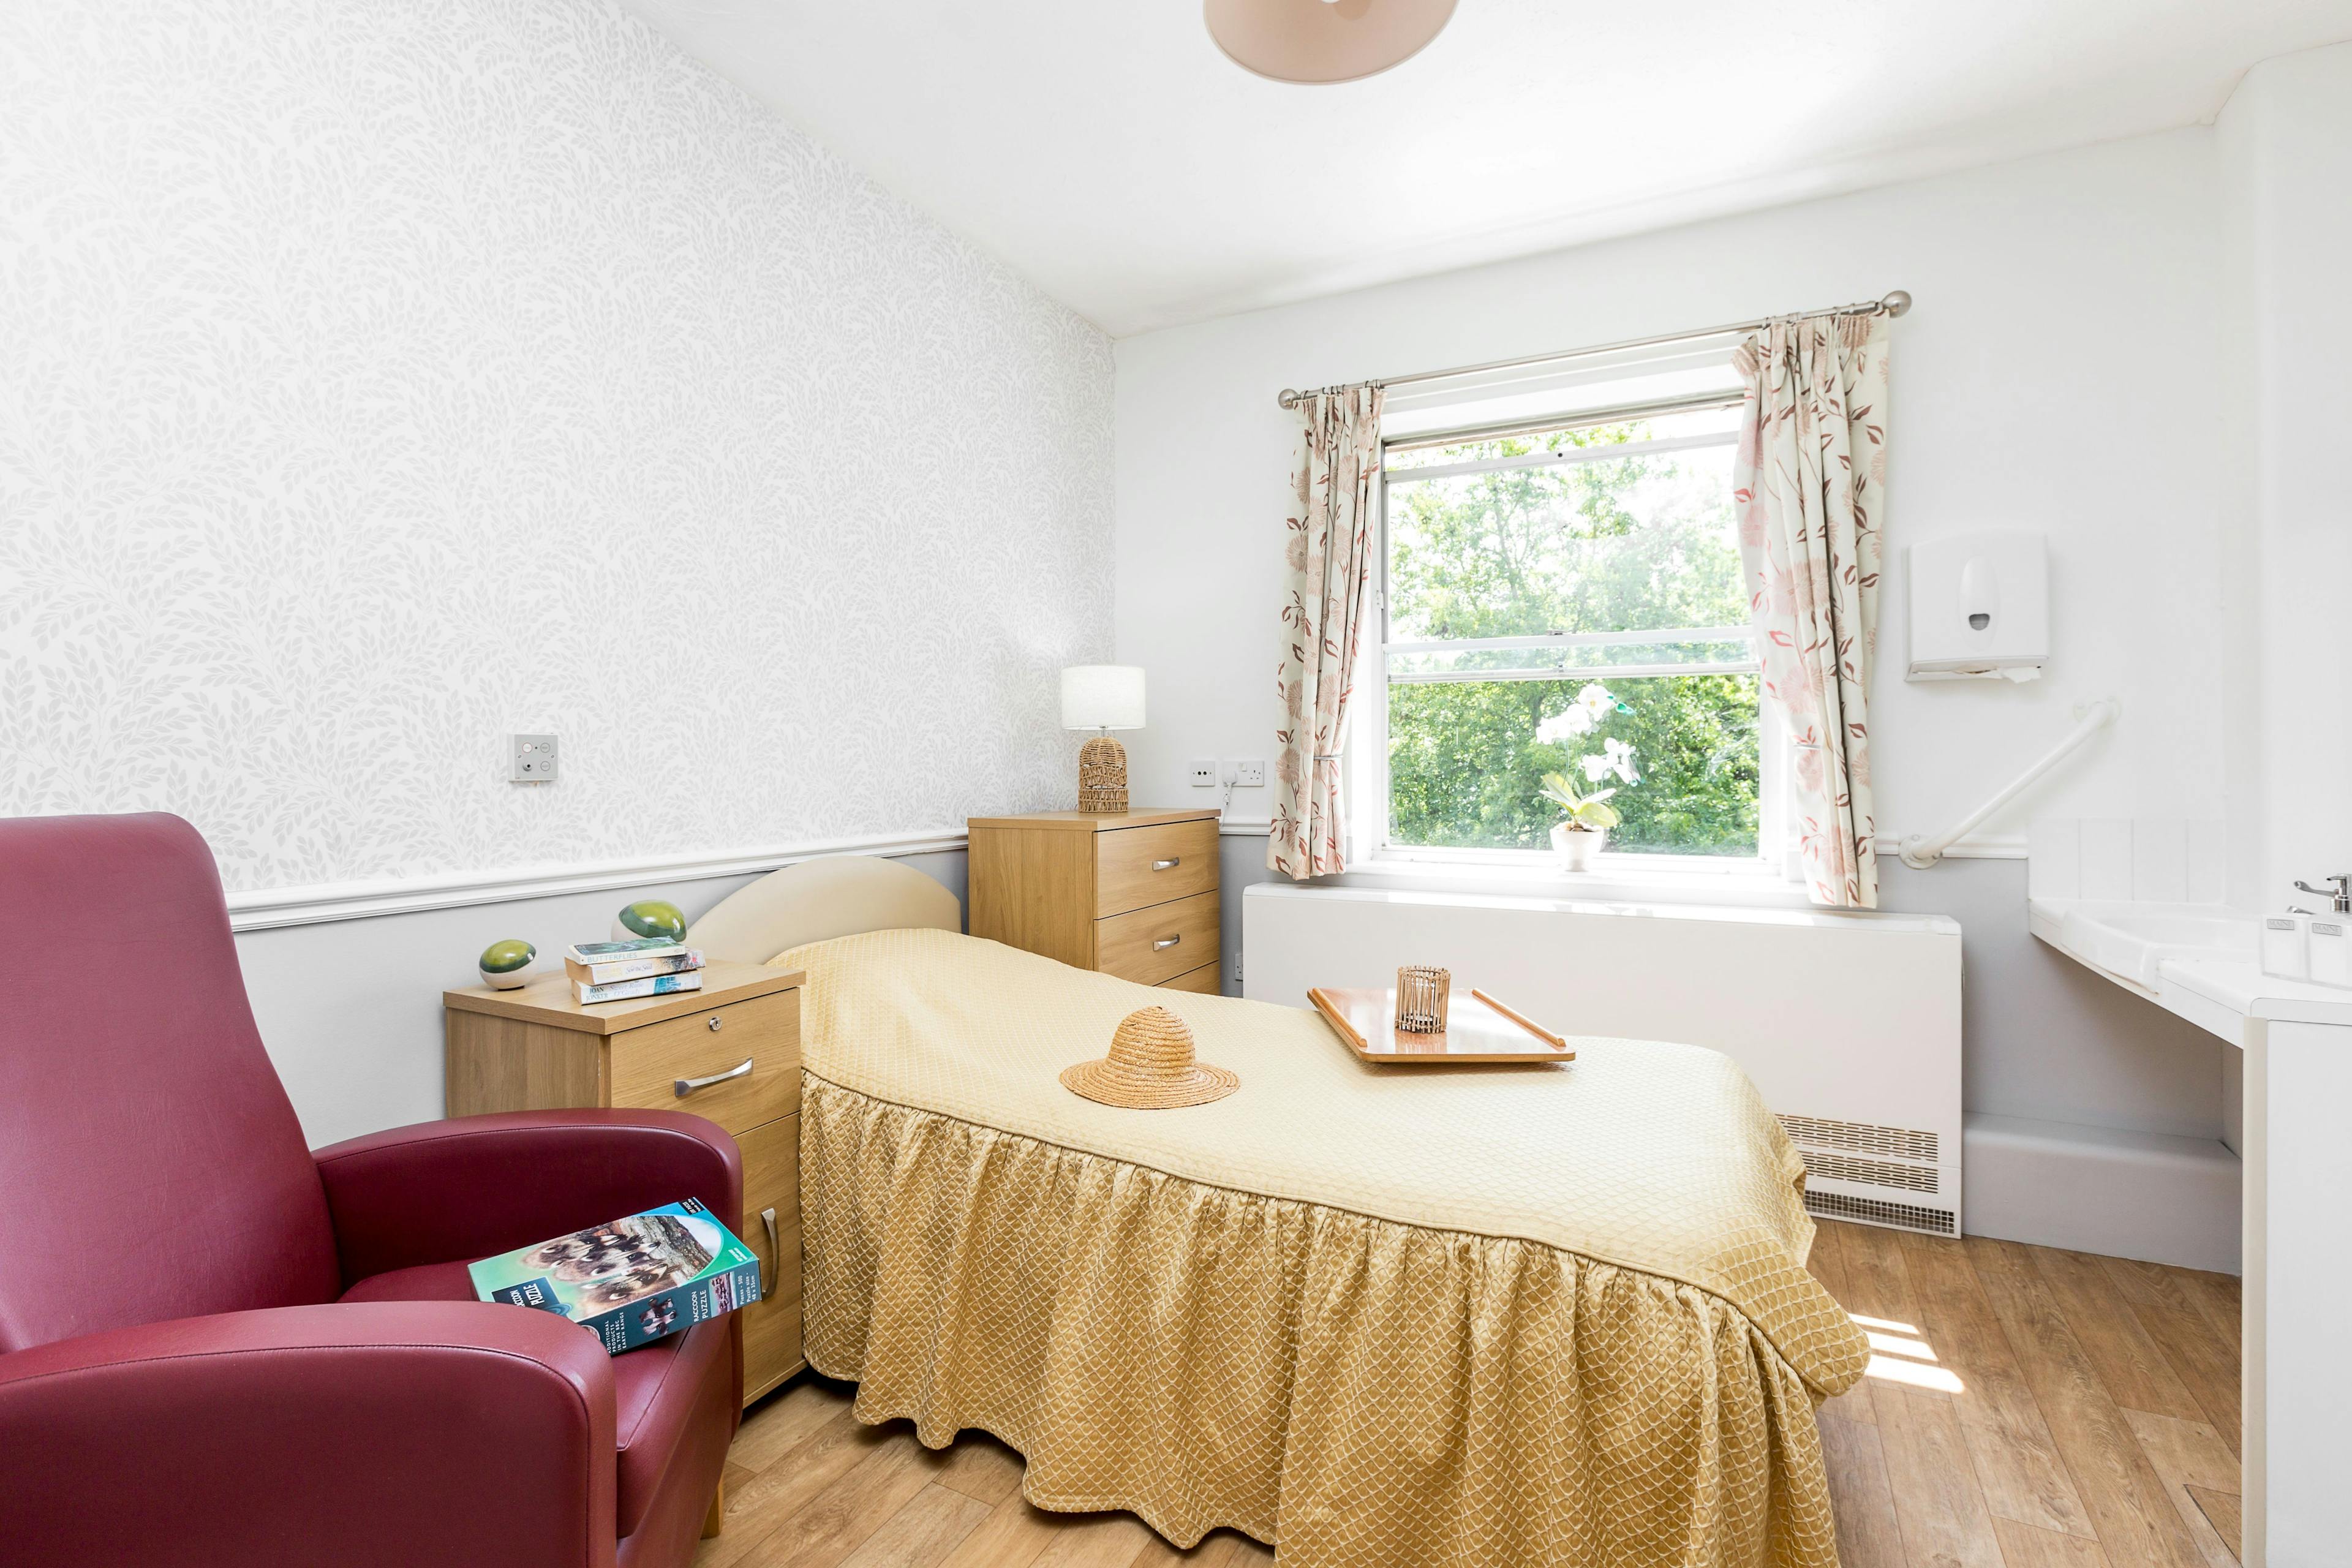 Bedroom at Brook House care home in Cambridge 